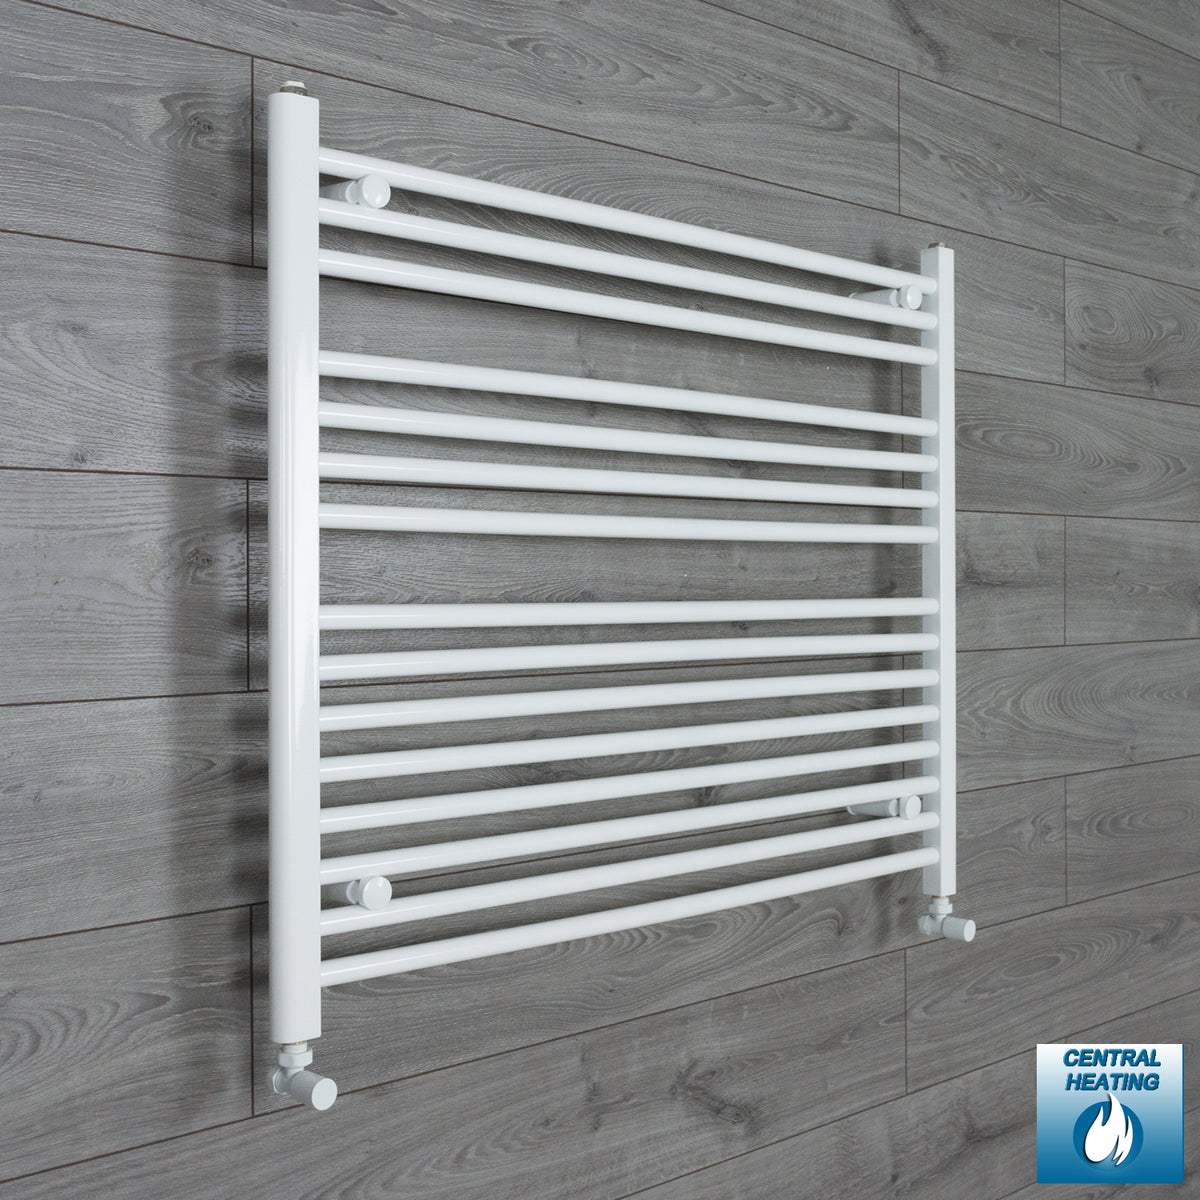 950mm Wide 800mm High White Towel Rail Radiator With Angled Valve